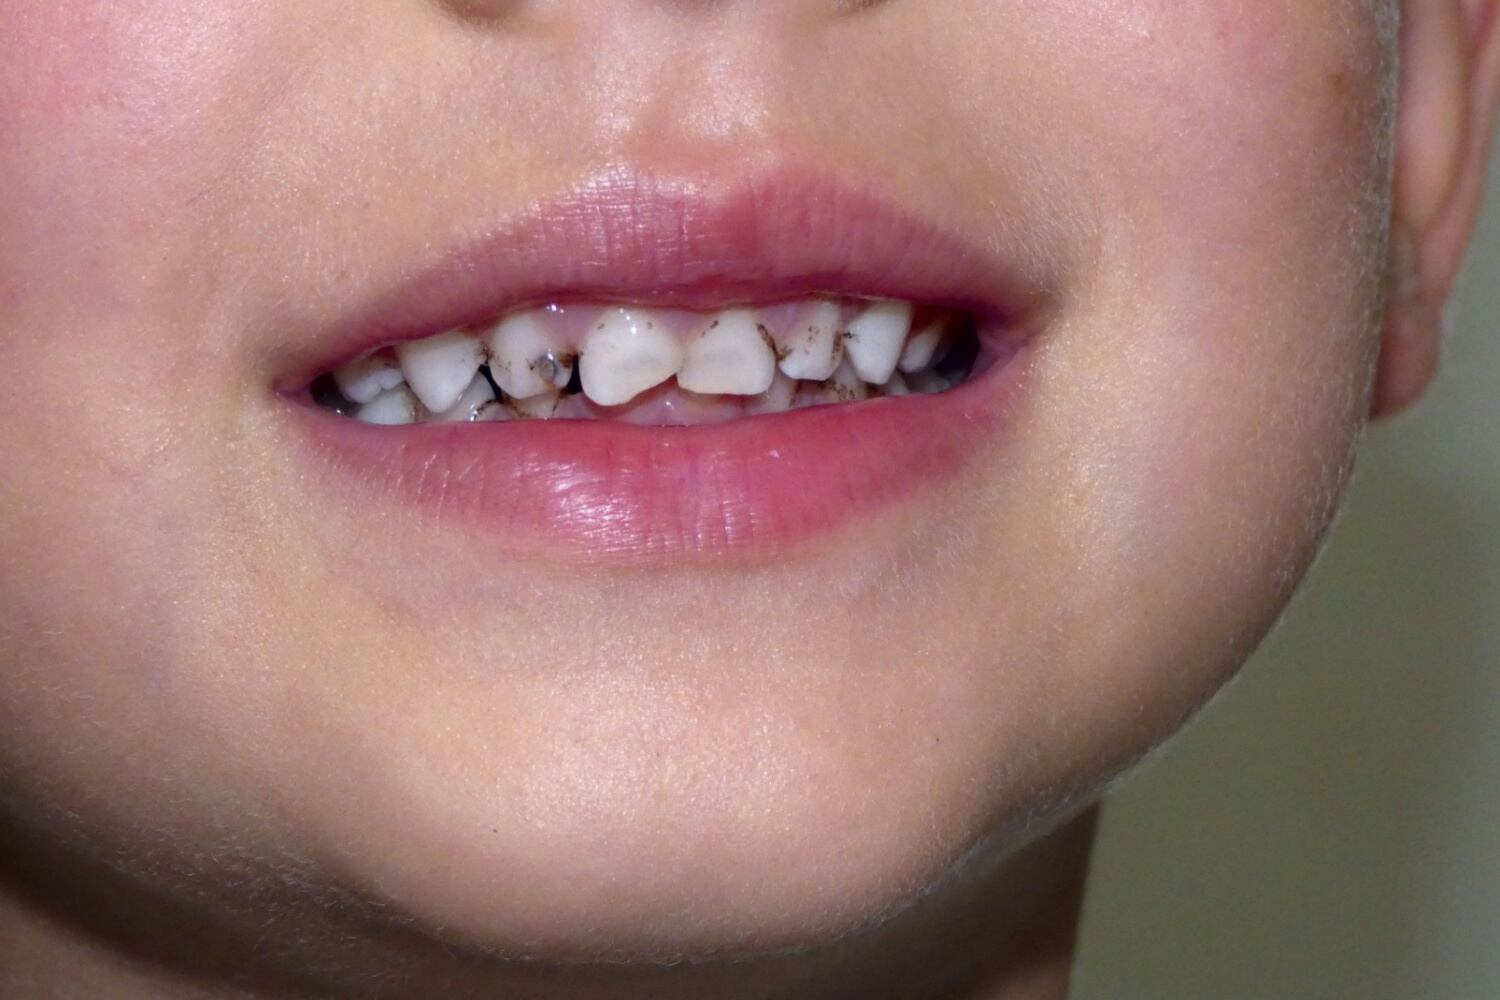 signs of baby tooth decay